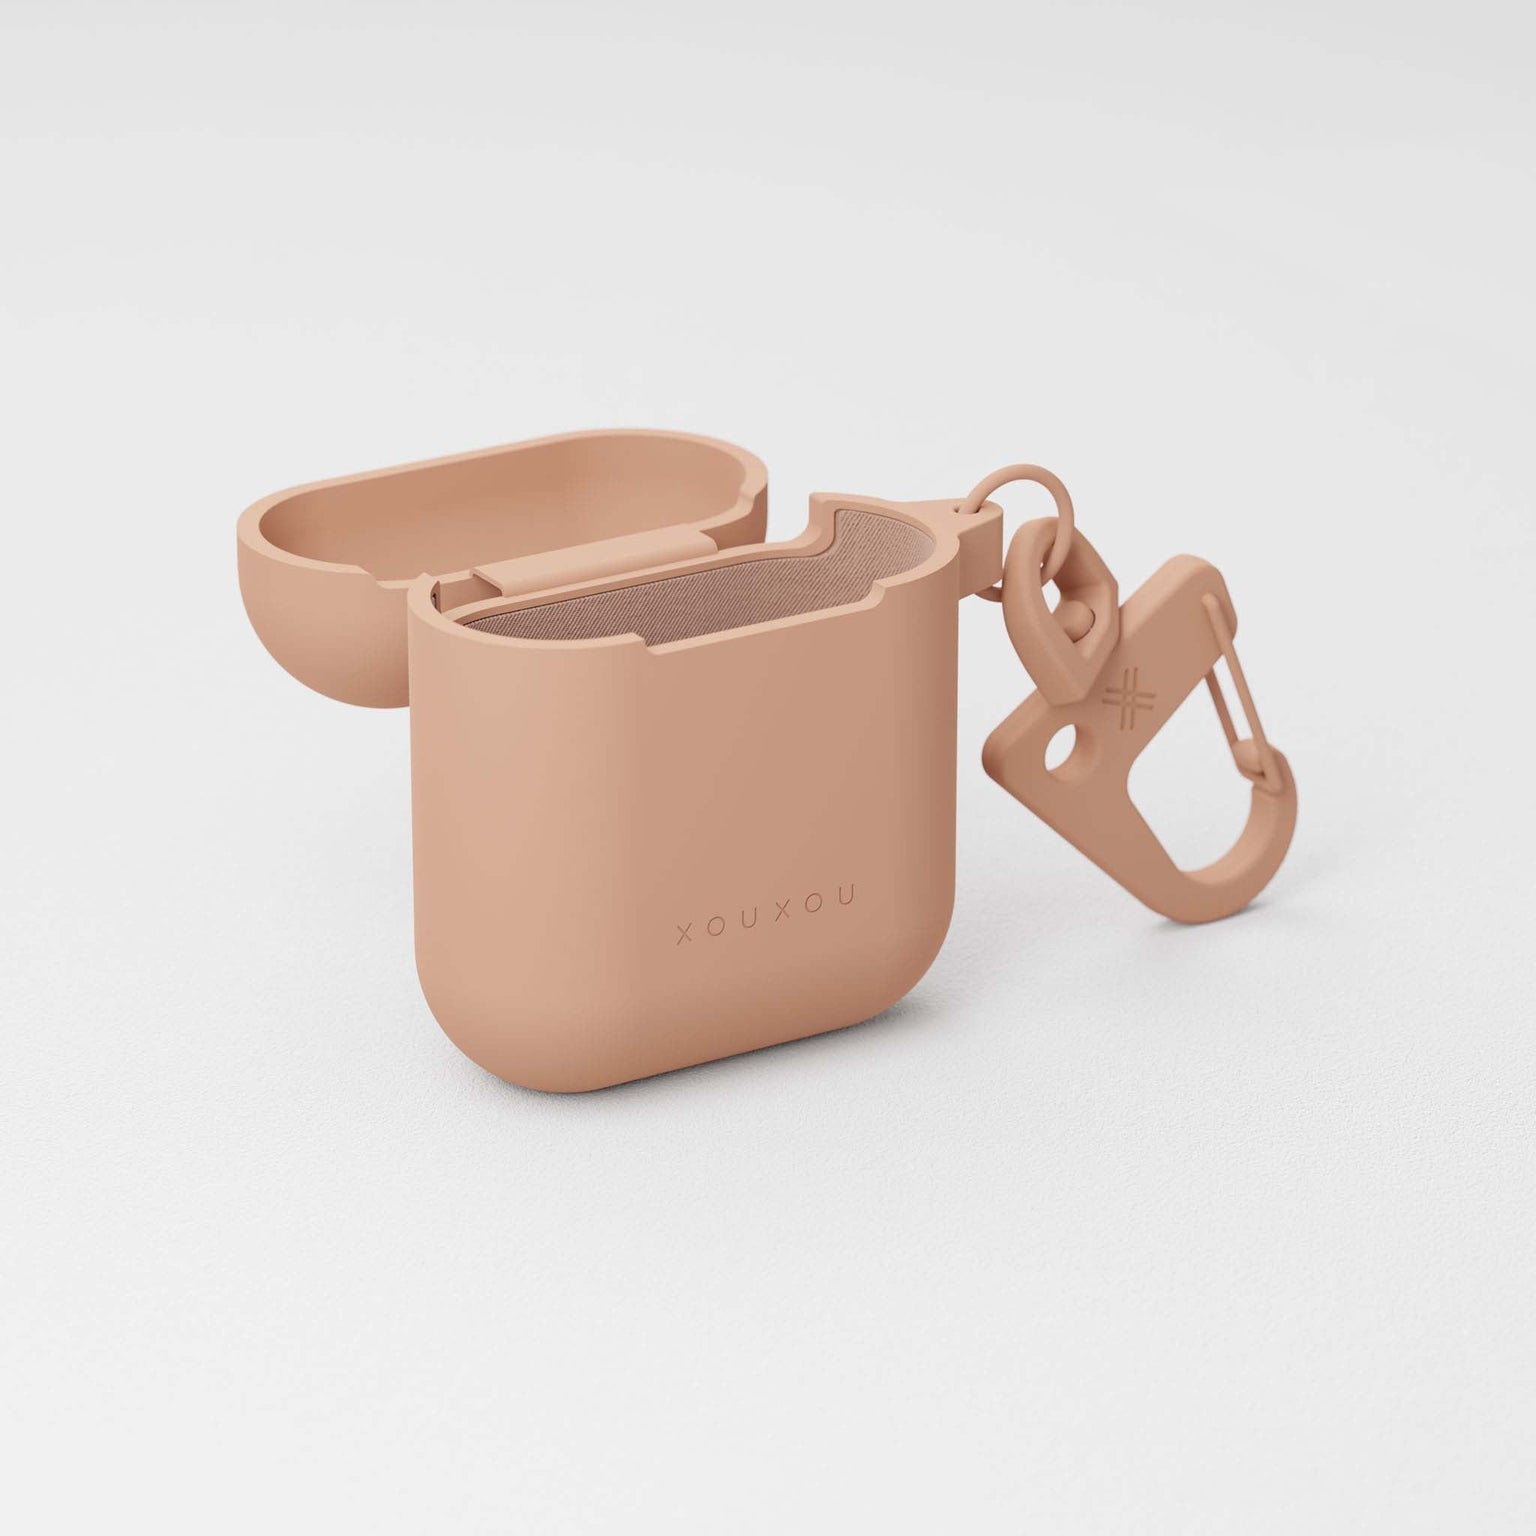 Apple AirPods silicone case in Powder Pink and attached carabiner hook | XOUXOU